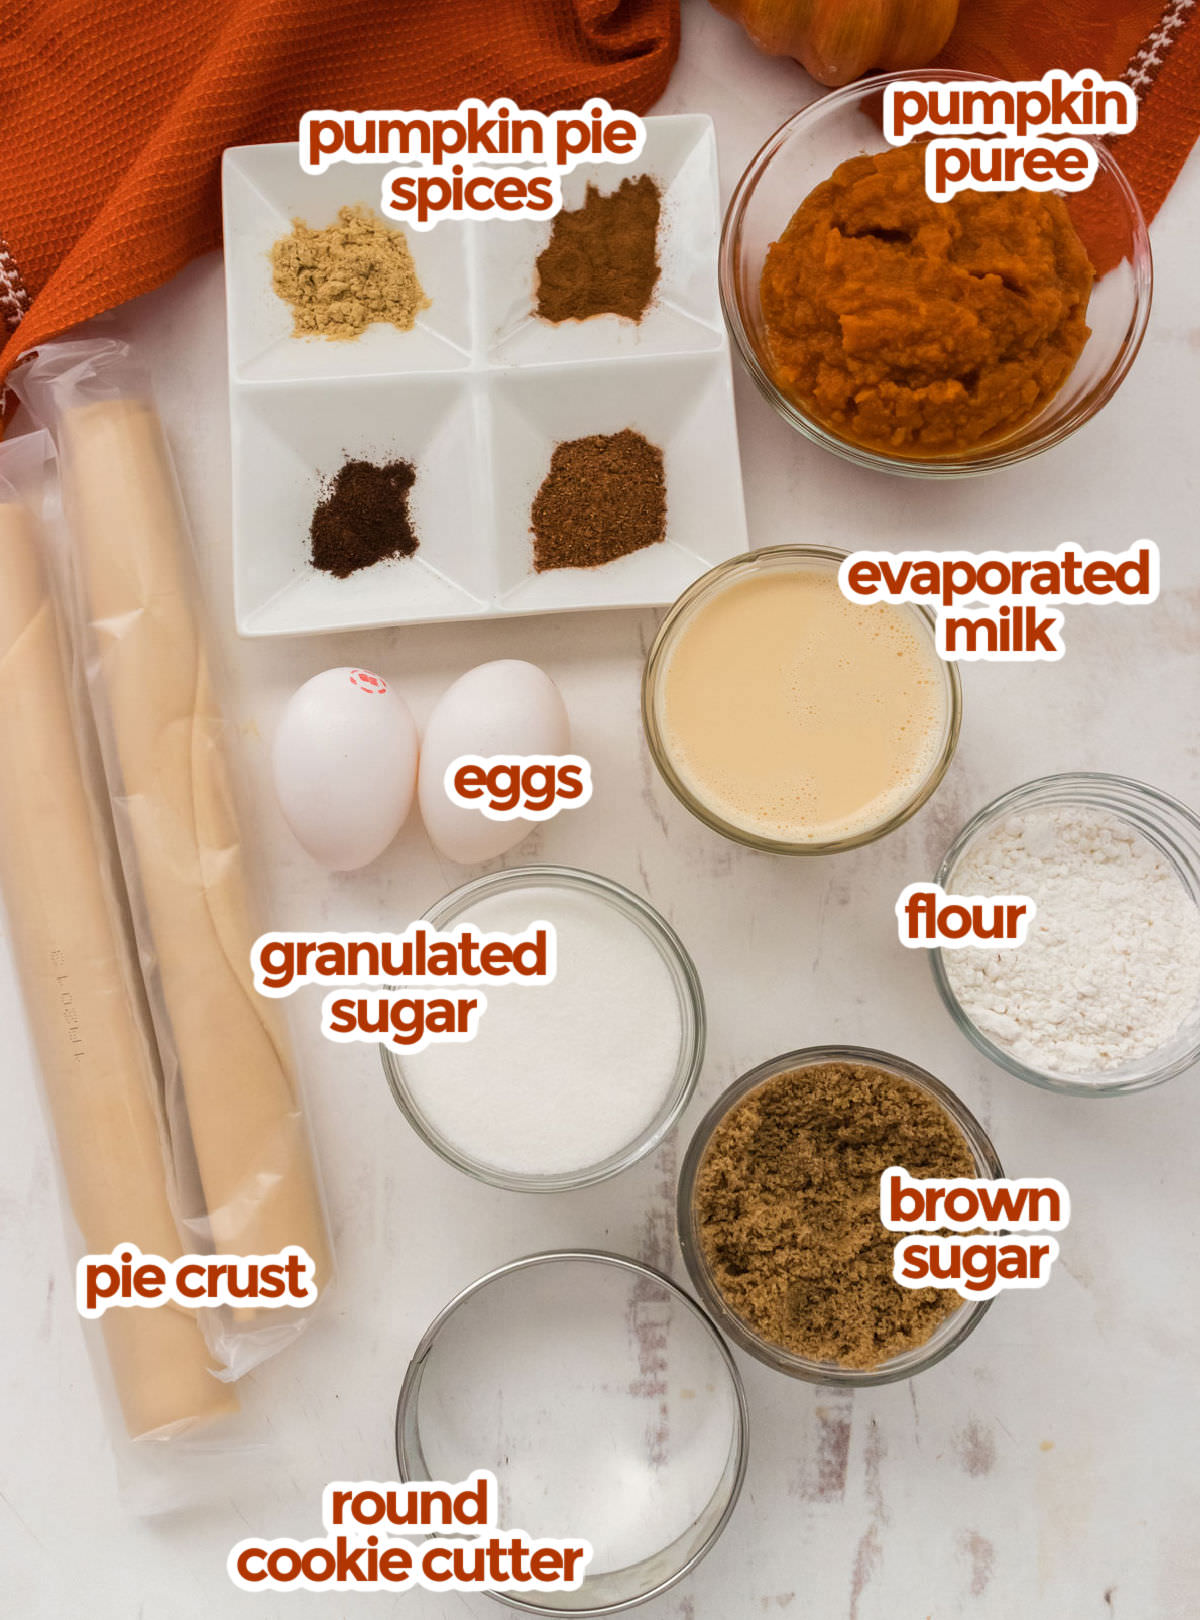 All the ingredients you will need to make Mini Pumpkin Pies including pie crust, pumpkin puree, pumpkin pie spices, evaporated milk, eggs, sugars and flour. 